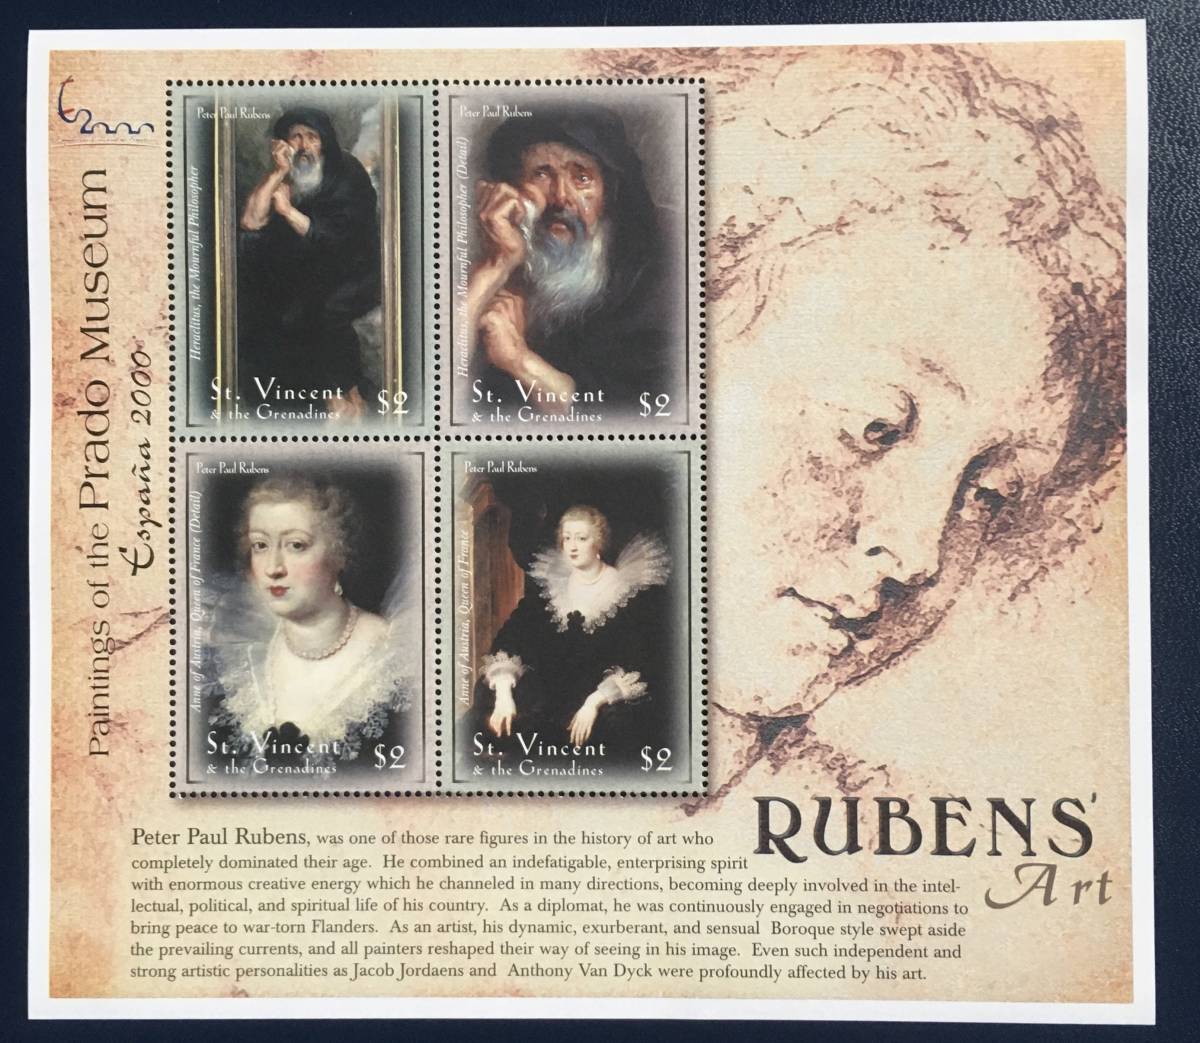 [ picture stamp ] cent vi n cent *g Rena Dean various island stamp Spain 2000 Roo Ben s small size seat [ crying . philosophy person spatula k Ray tos] unused beautiful goods 